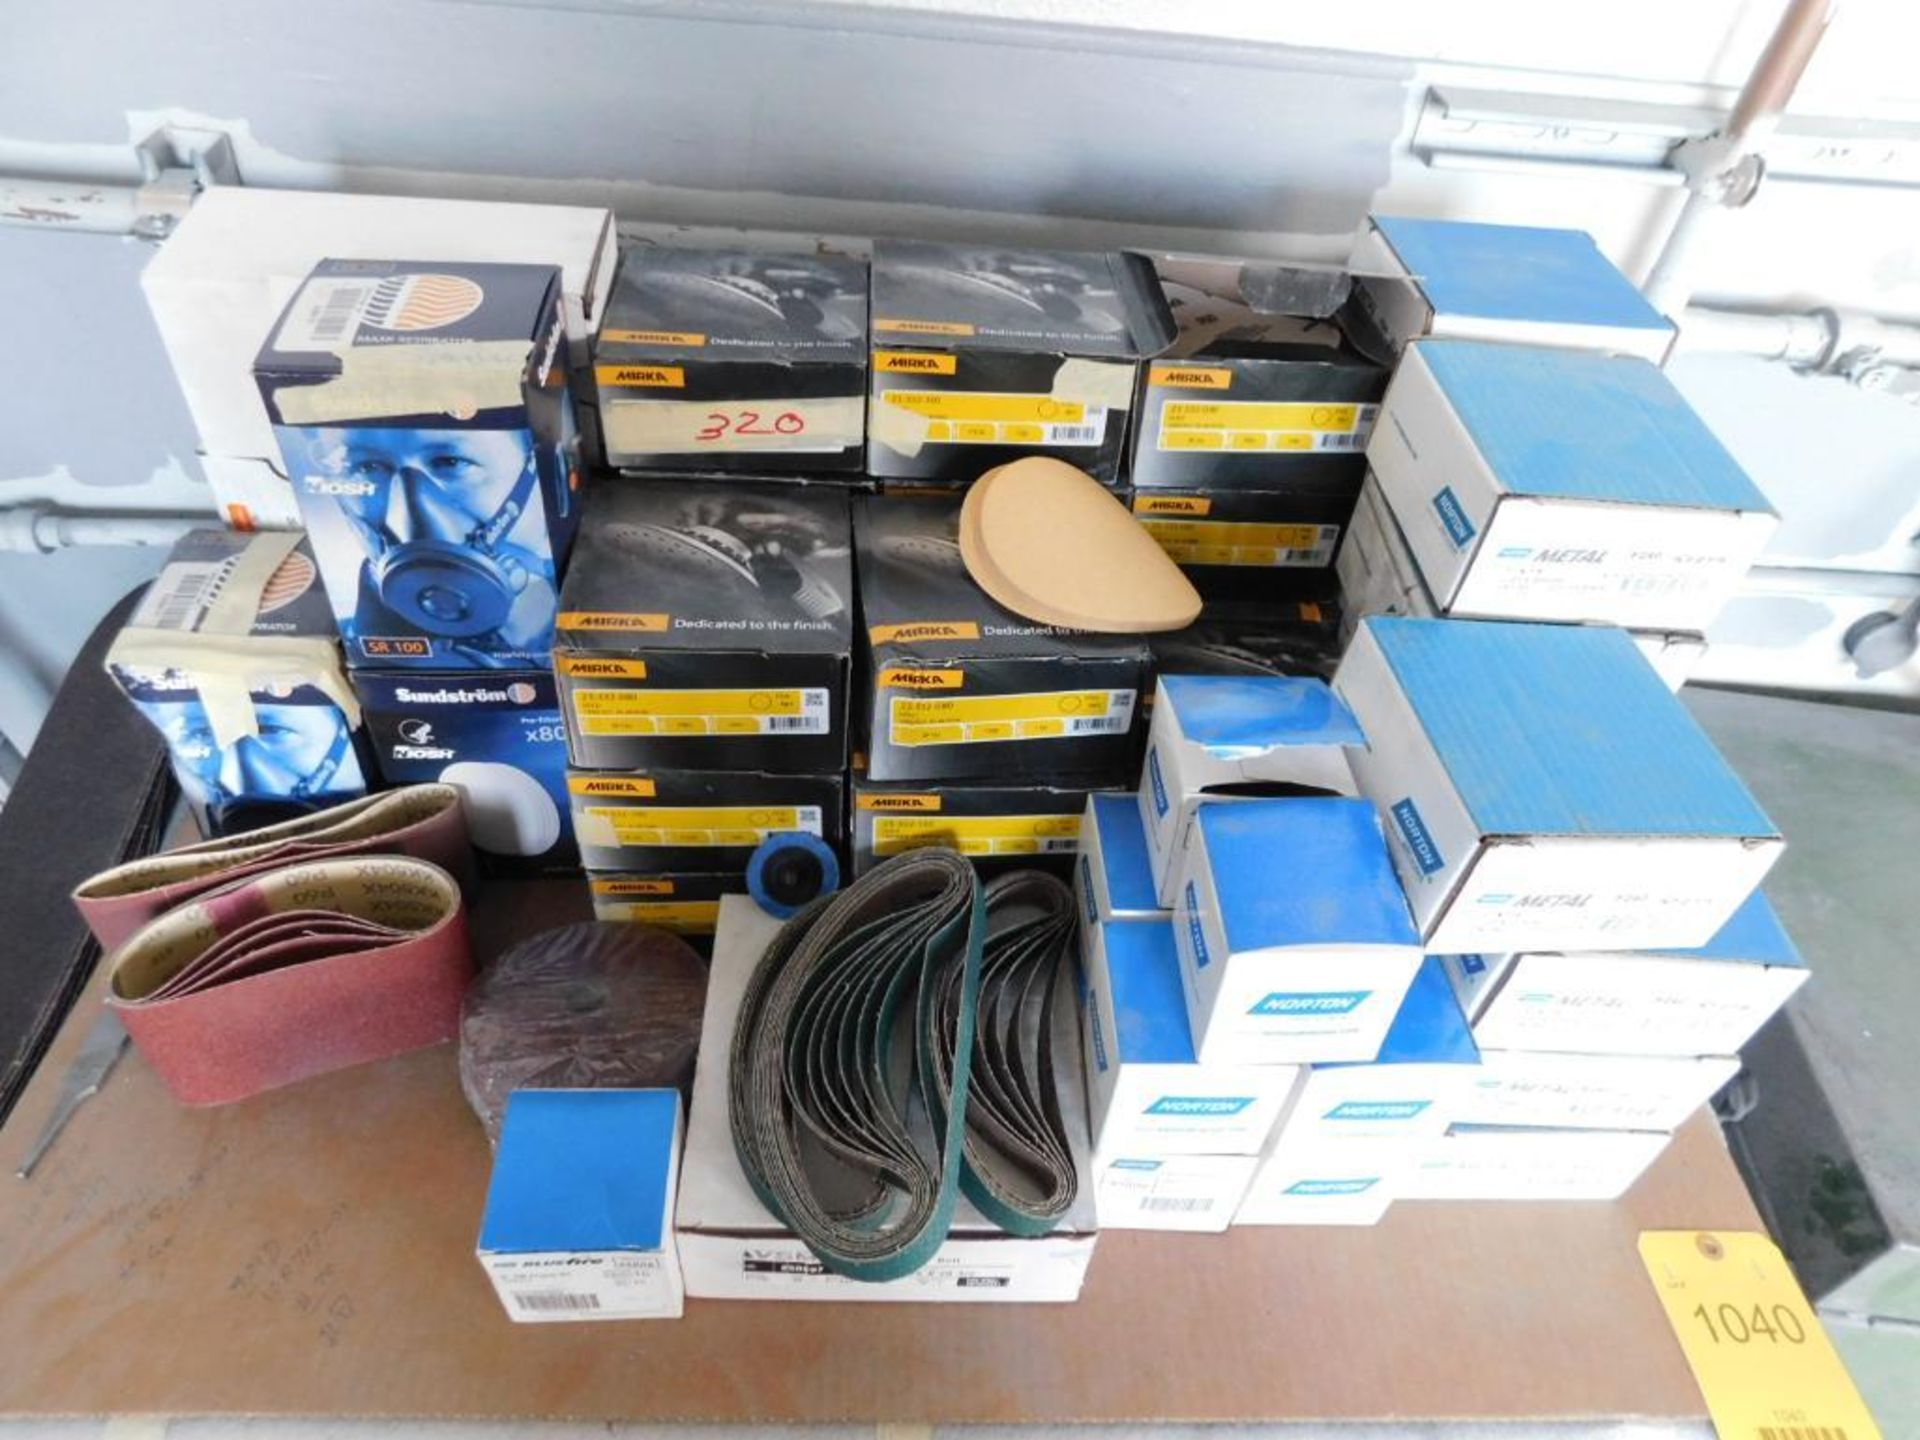 LOT: Abrasive Supplies, Cart, Tool Box, 30" x 72" Maple Top Work Bench, Fans, Heaters, etc. - Image 2 of 11